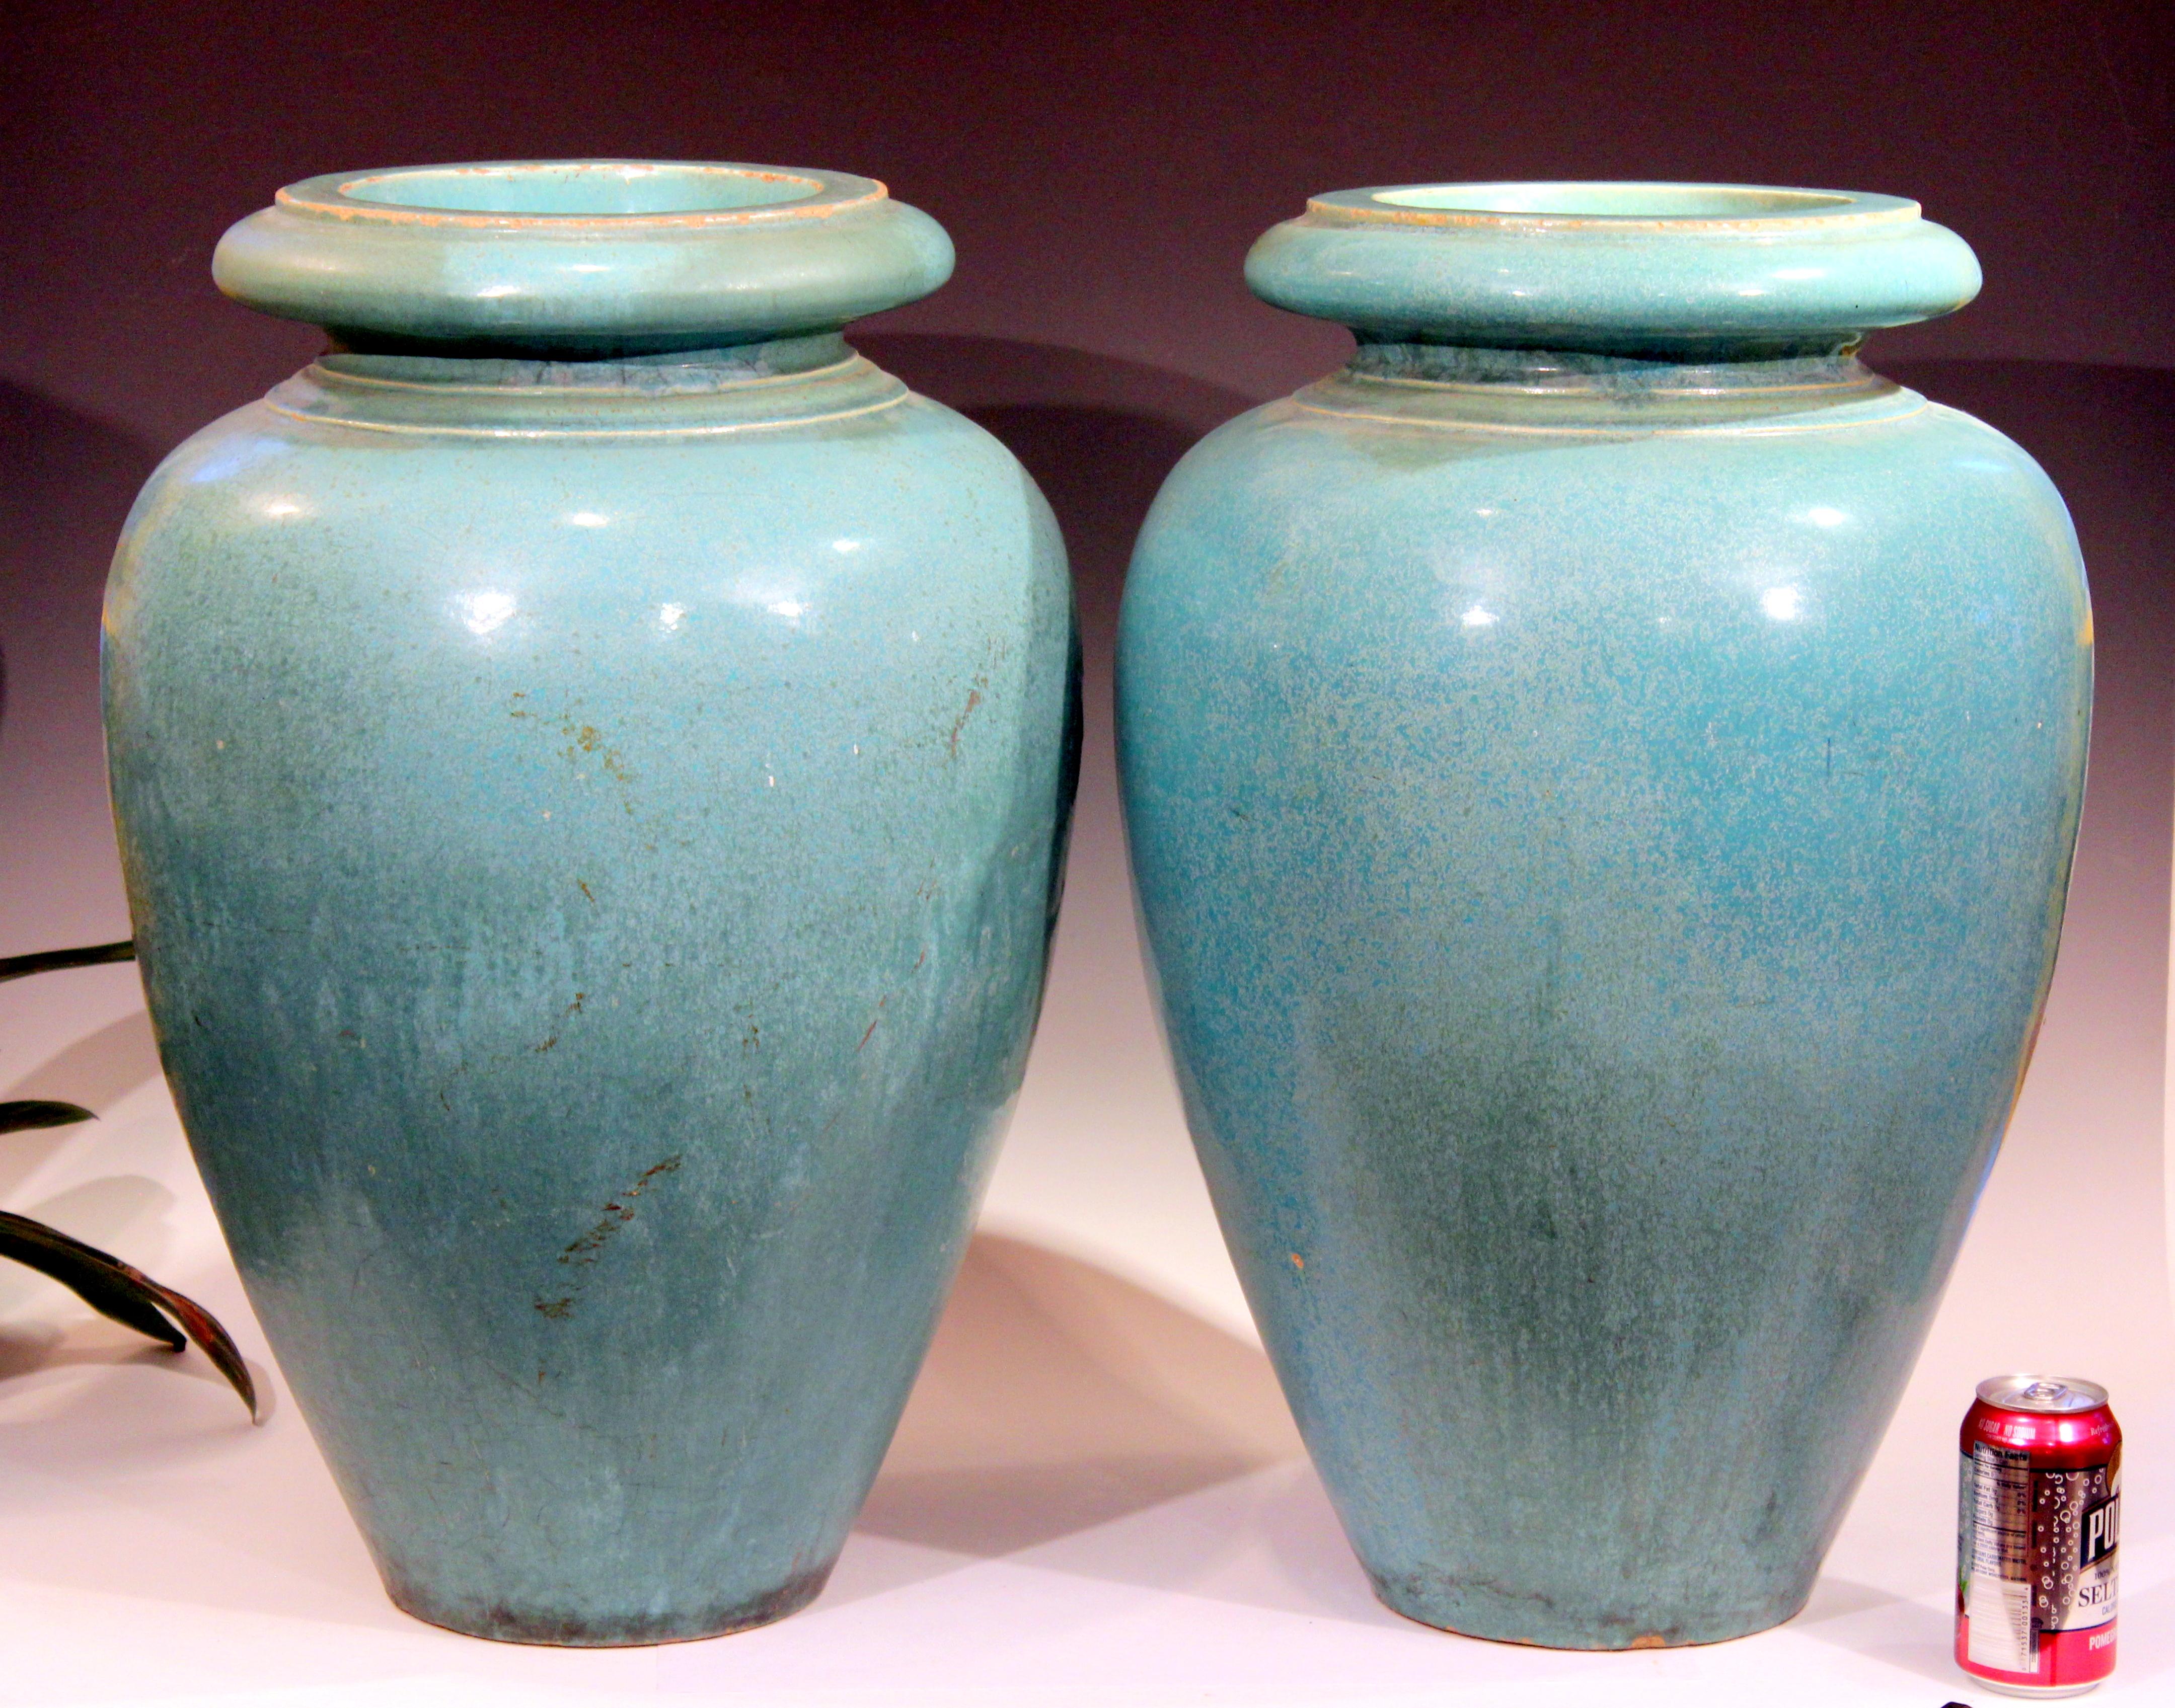 Large pair of garden urns by the Galloway Terracotta company of Philadelphia in green/turquoise crystalline glaze, circa early 20th century. Measures: 24